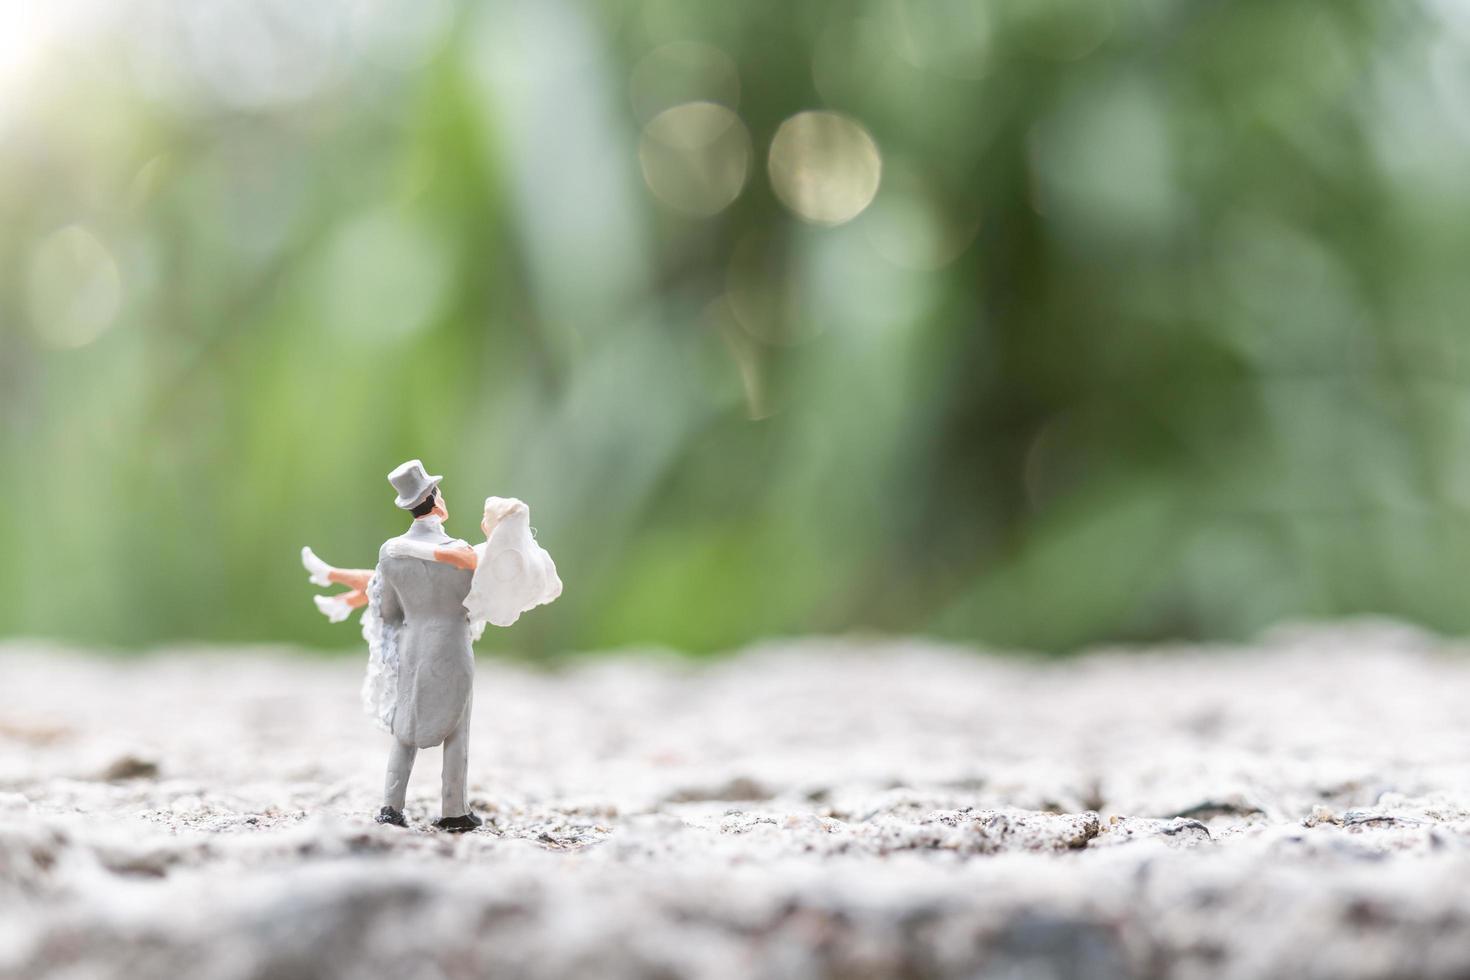 Miniature bride and groom standing outdoors with a blurry nature background photo